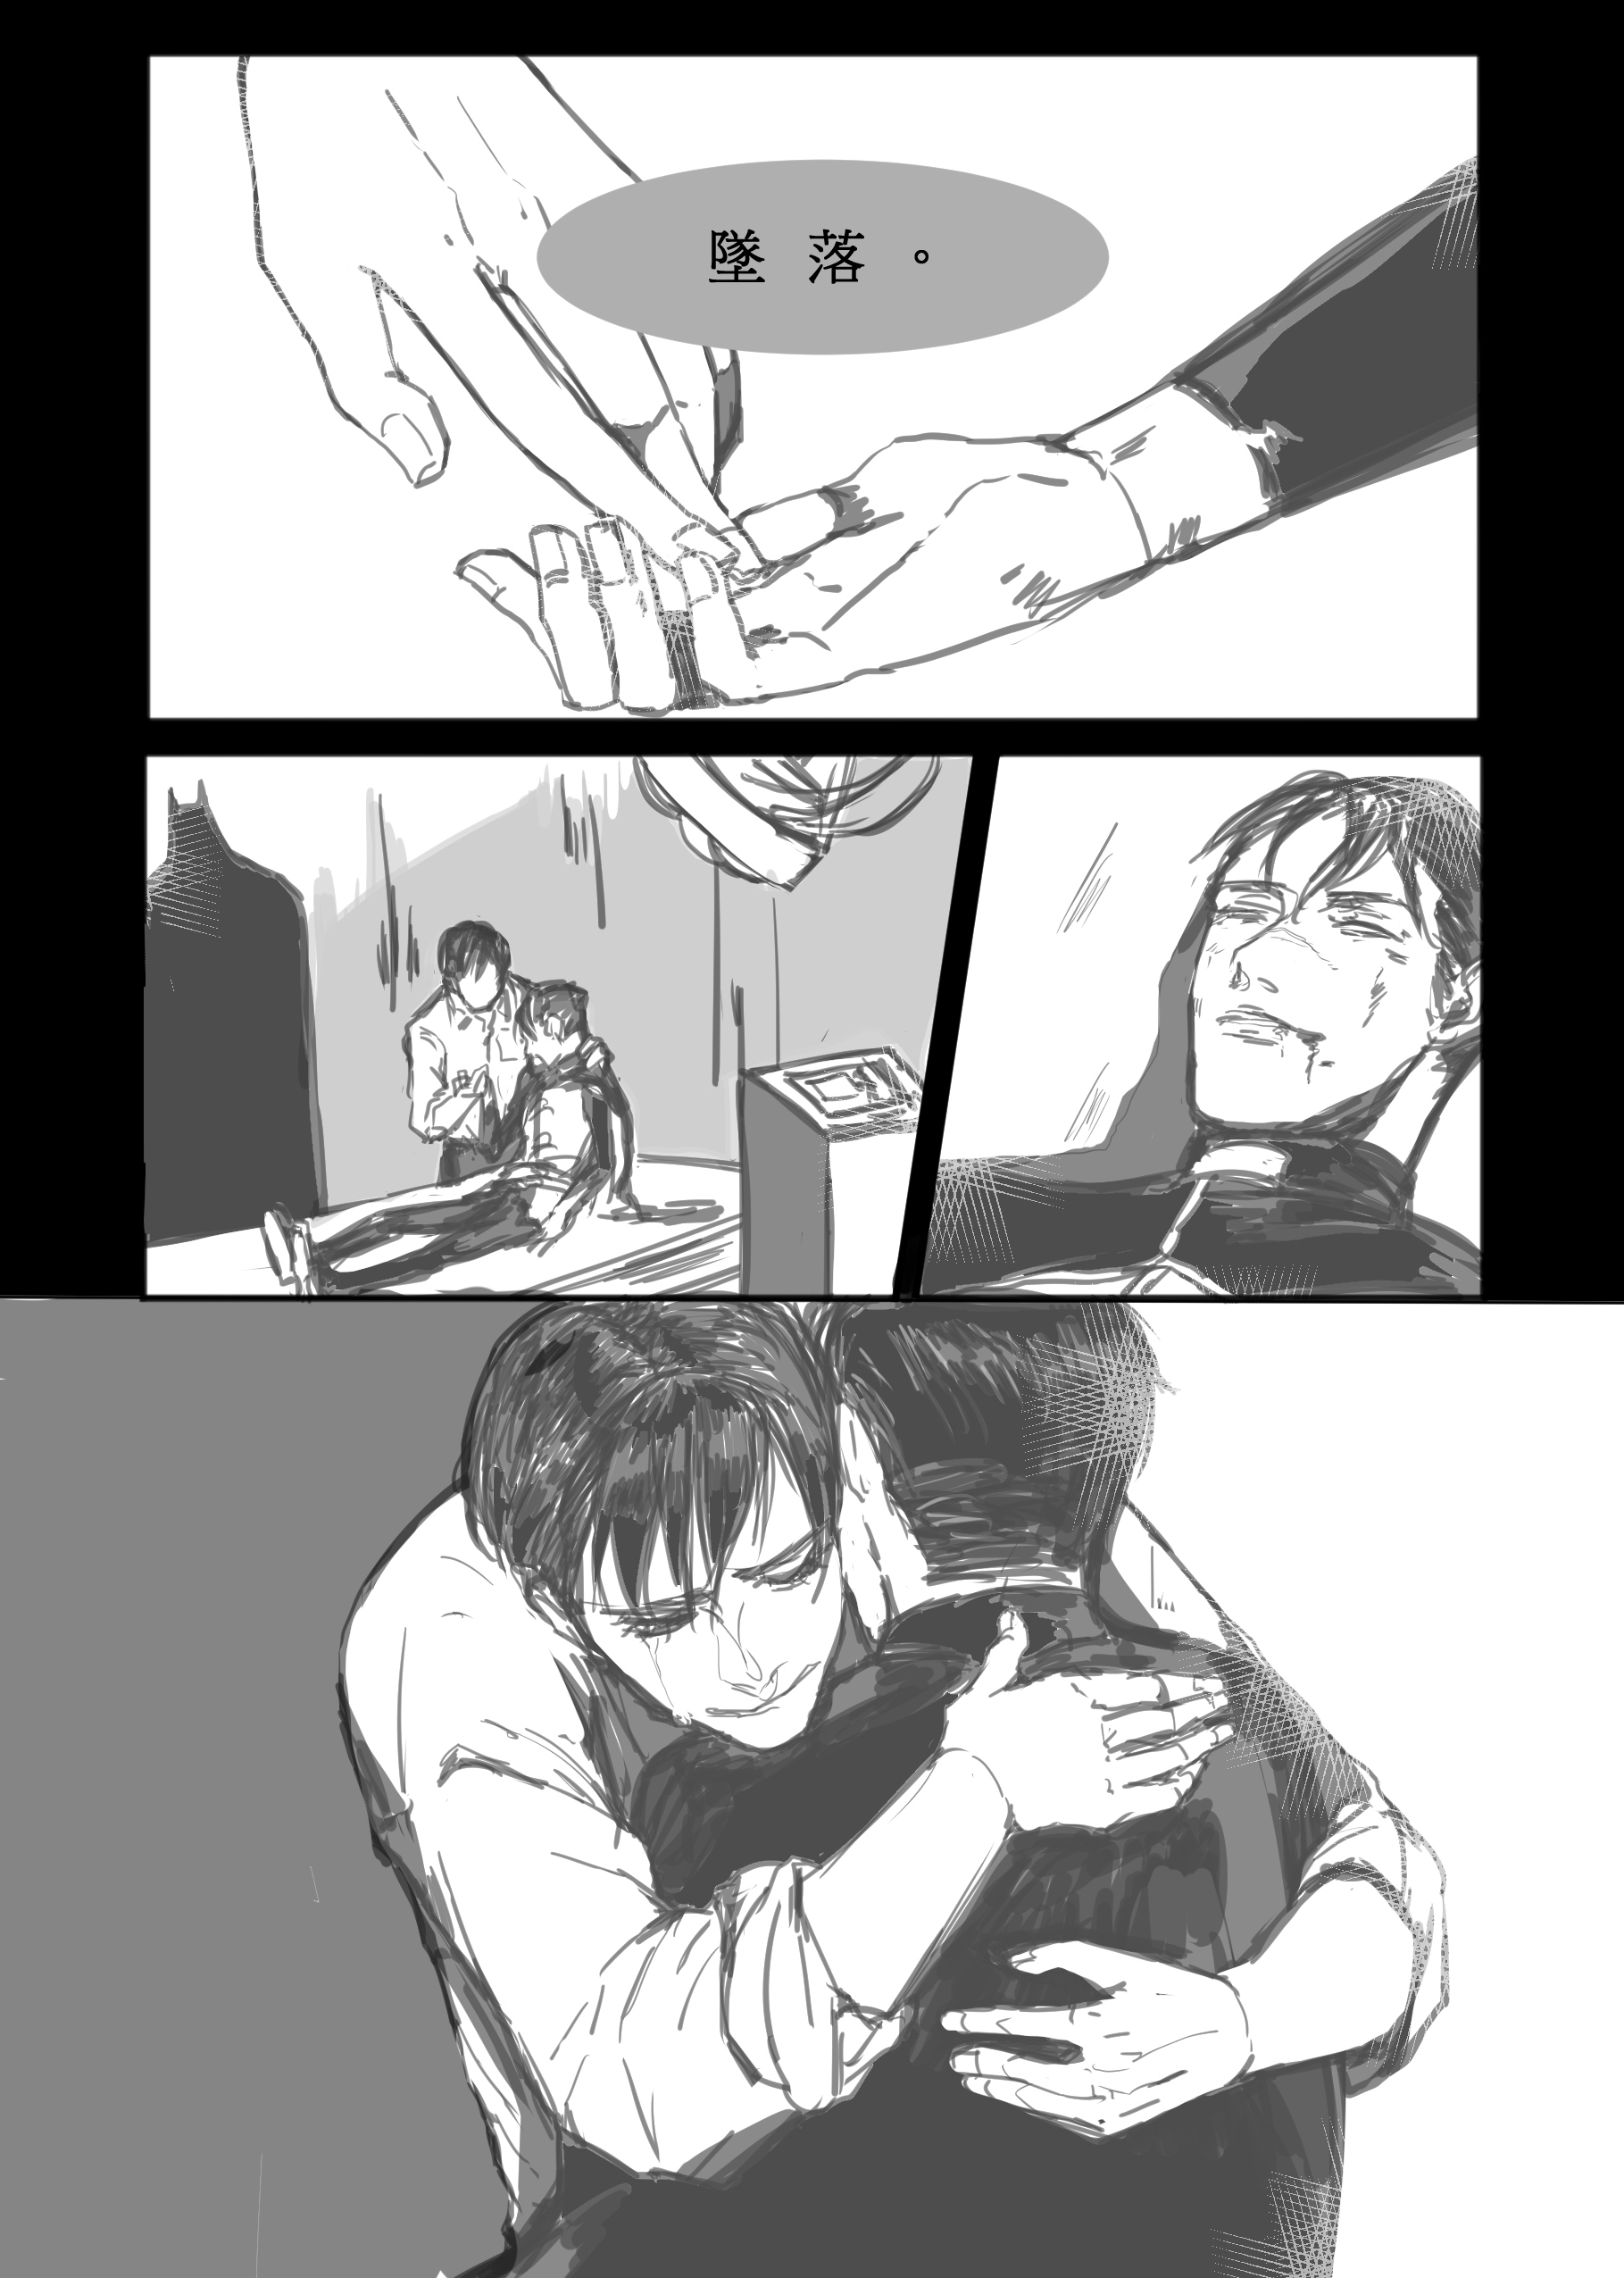 [DC][Jaydick]Long for You 試閱圖